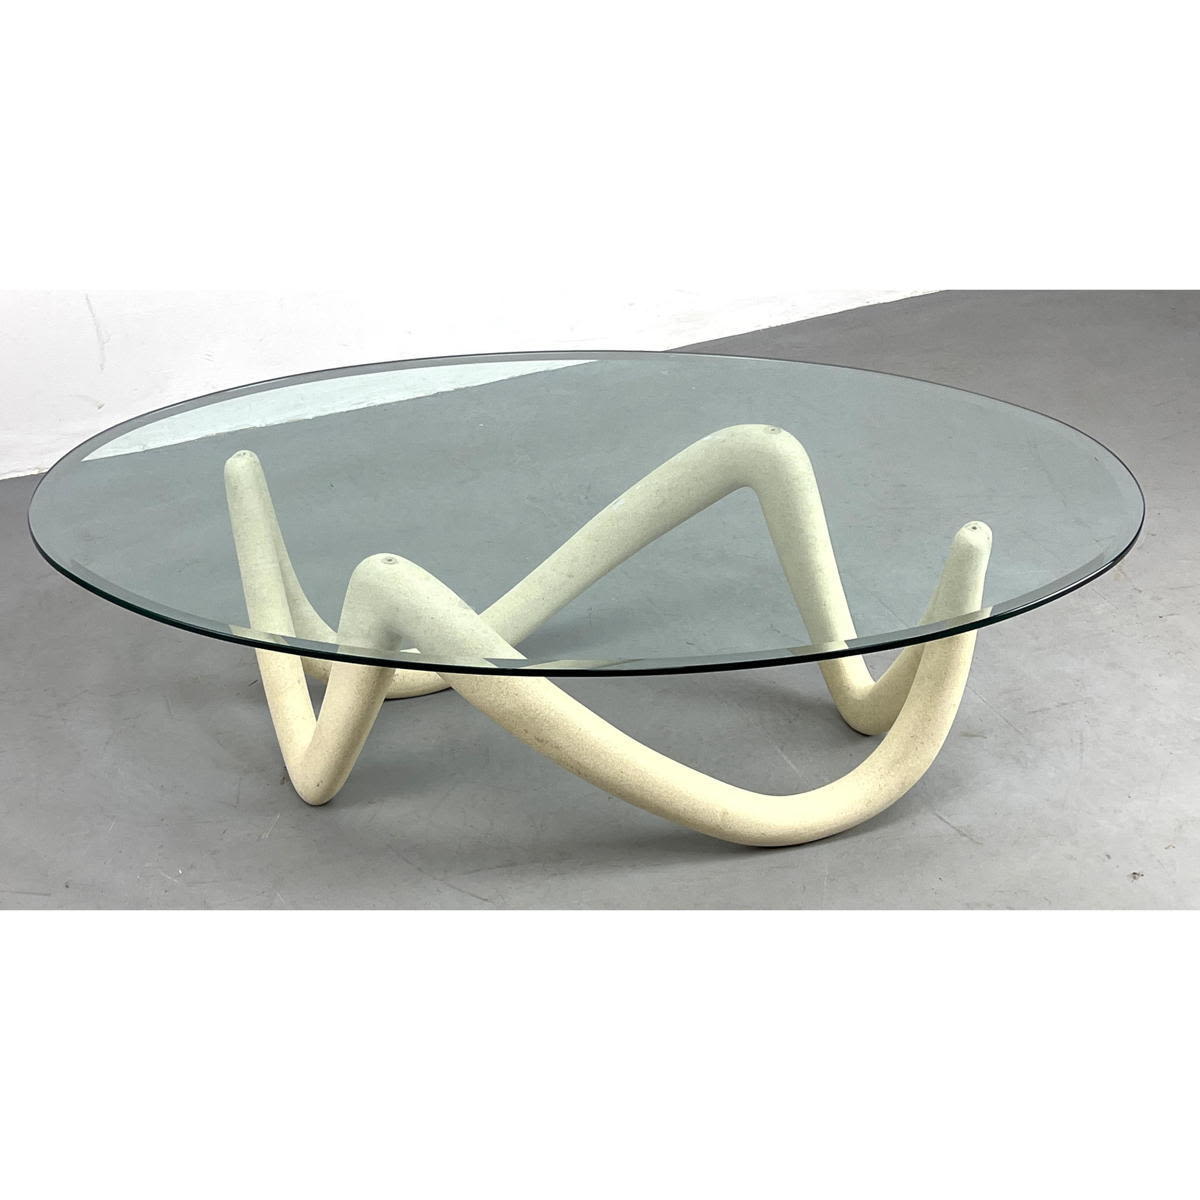 Modernist Coffee Table Glass Top 3acb68